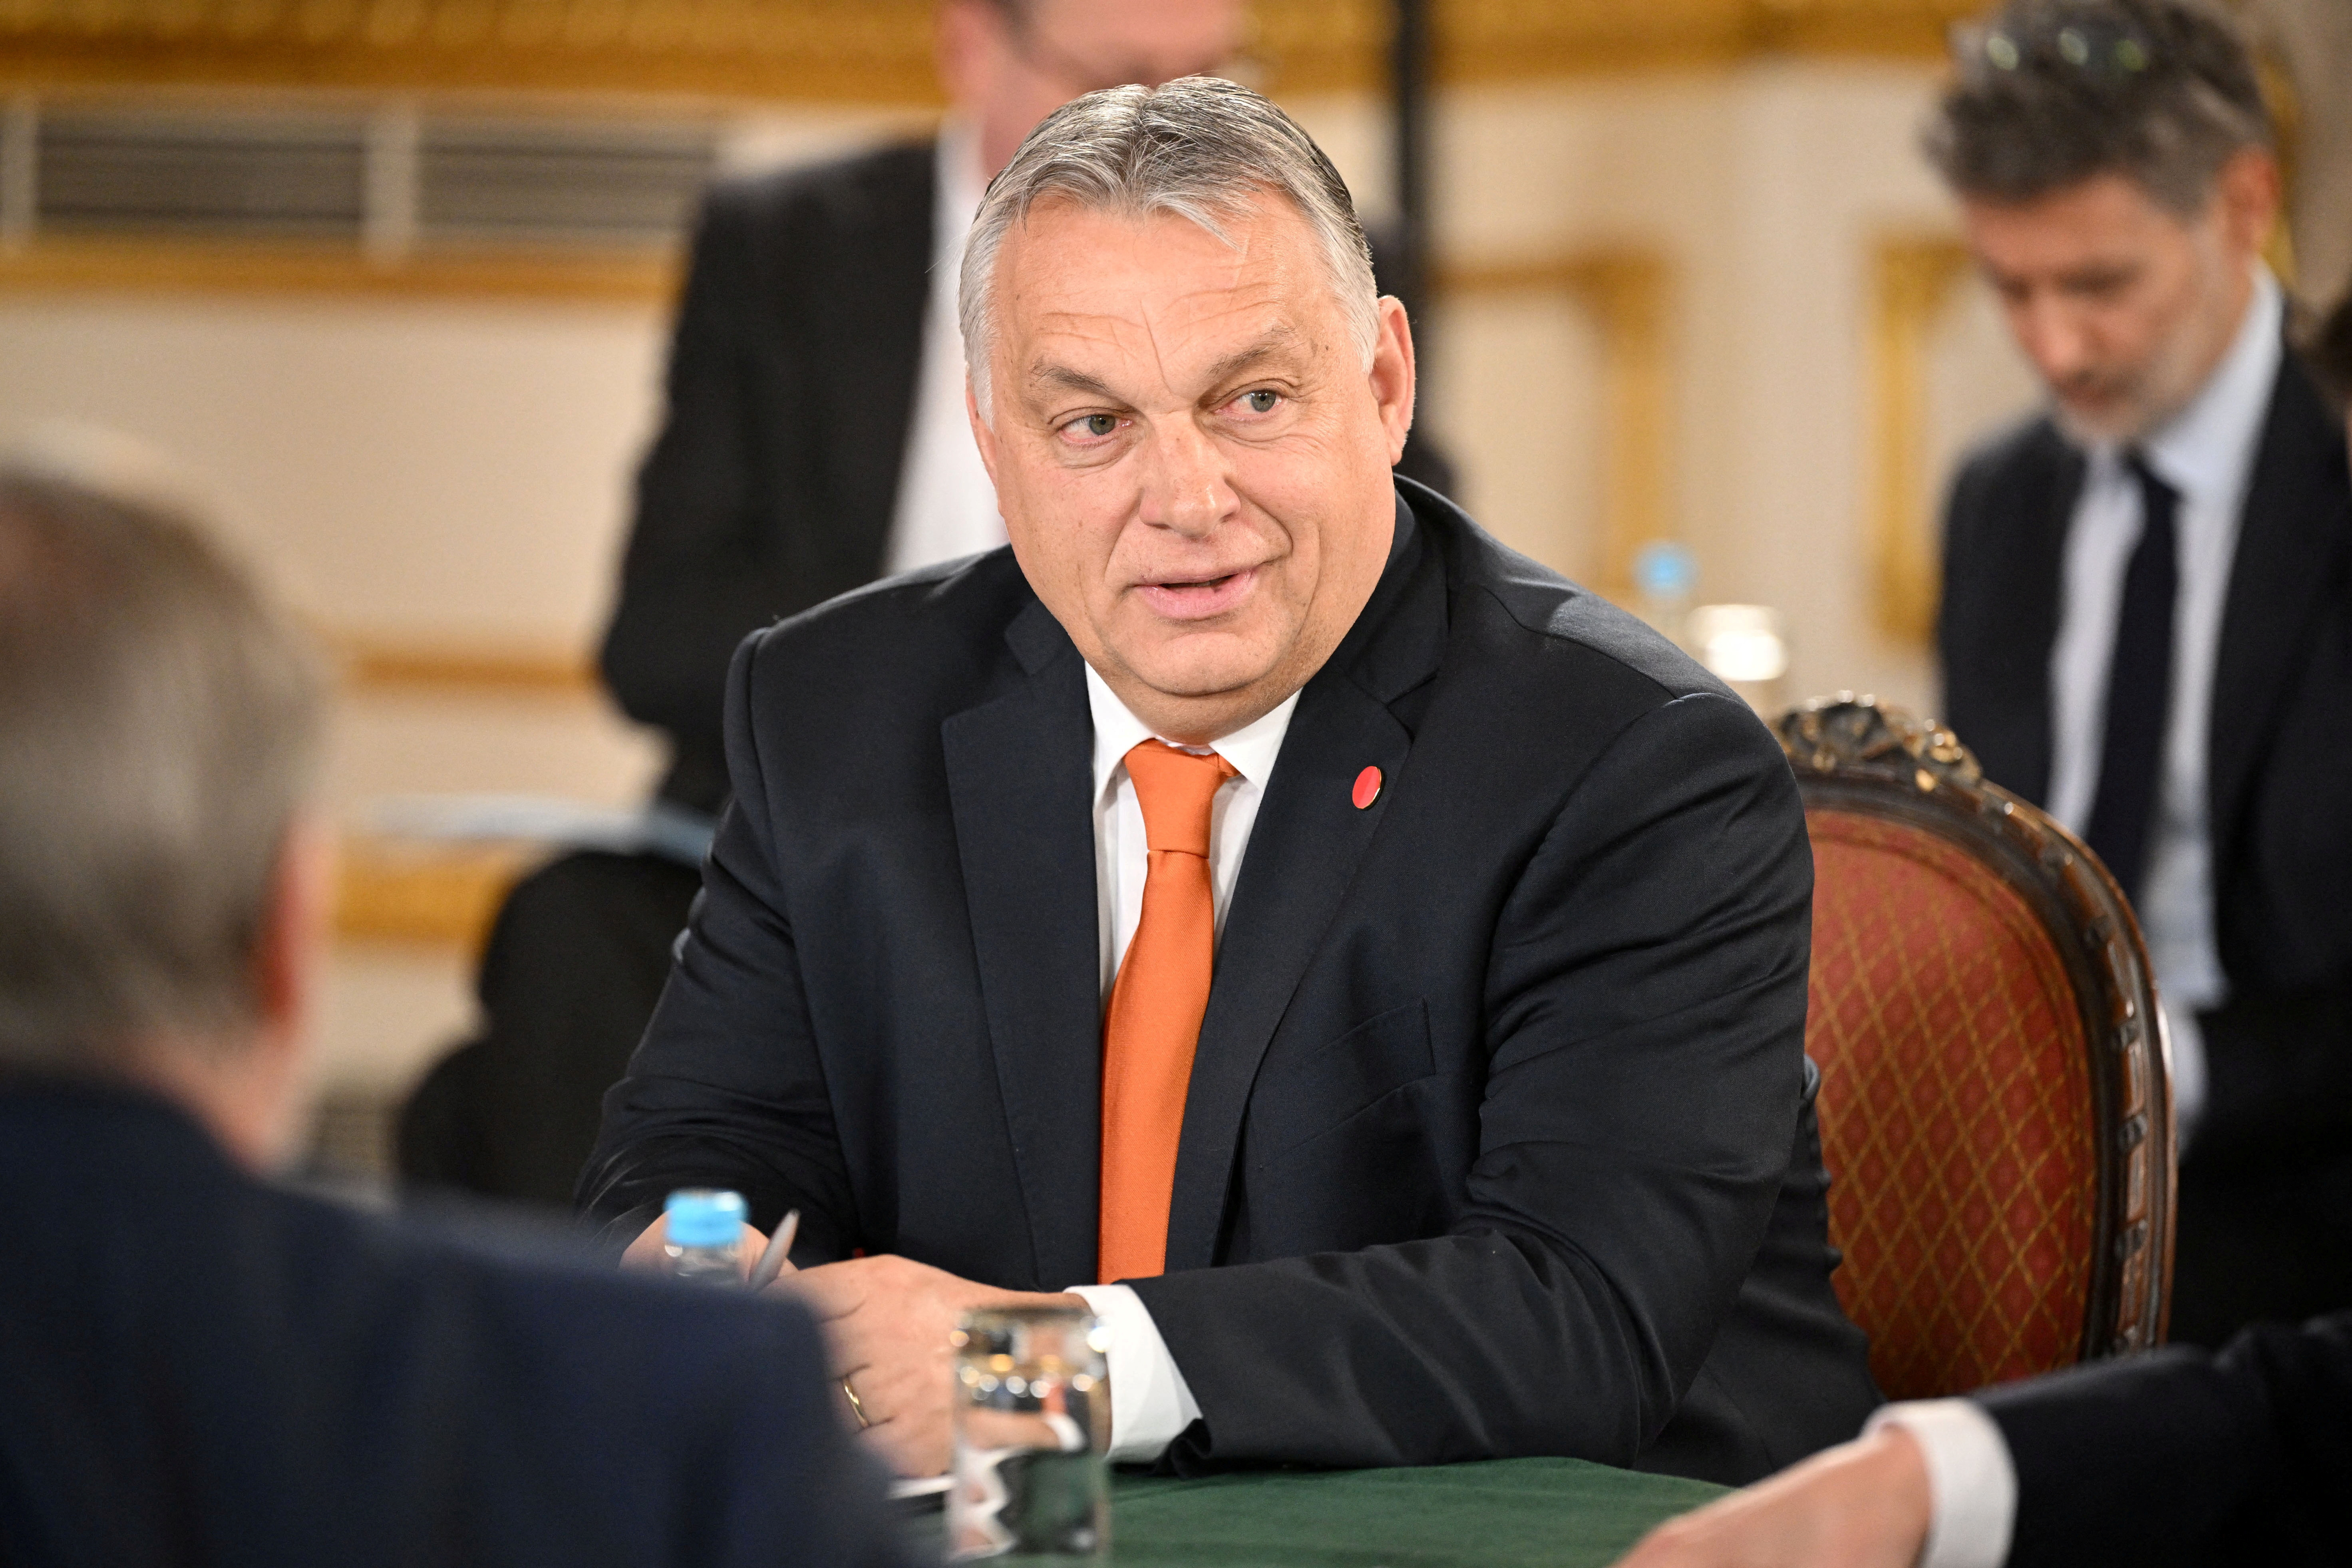 Hungary's Prime Minister Viktor Orban attends a meeting in London